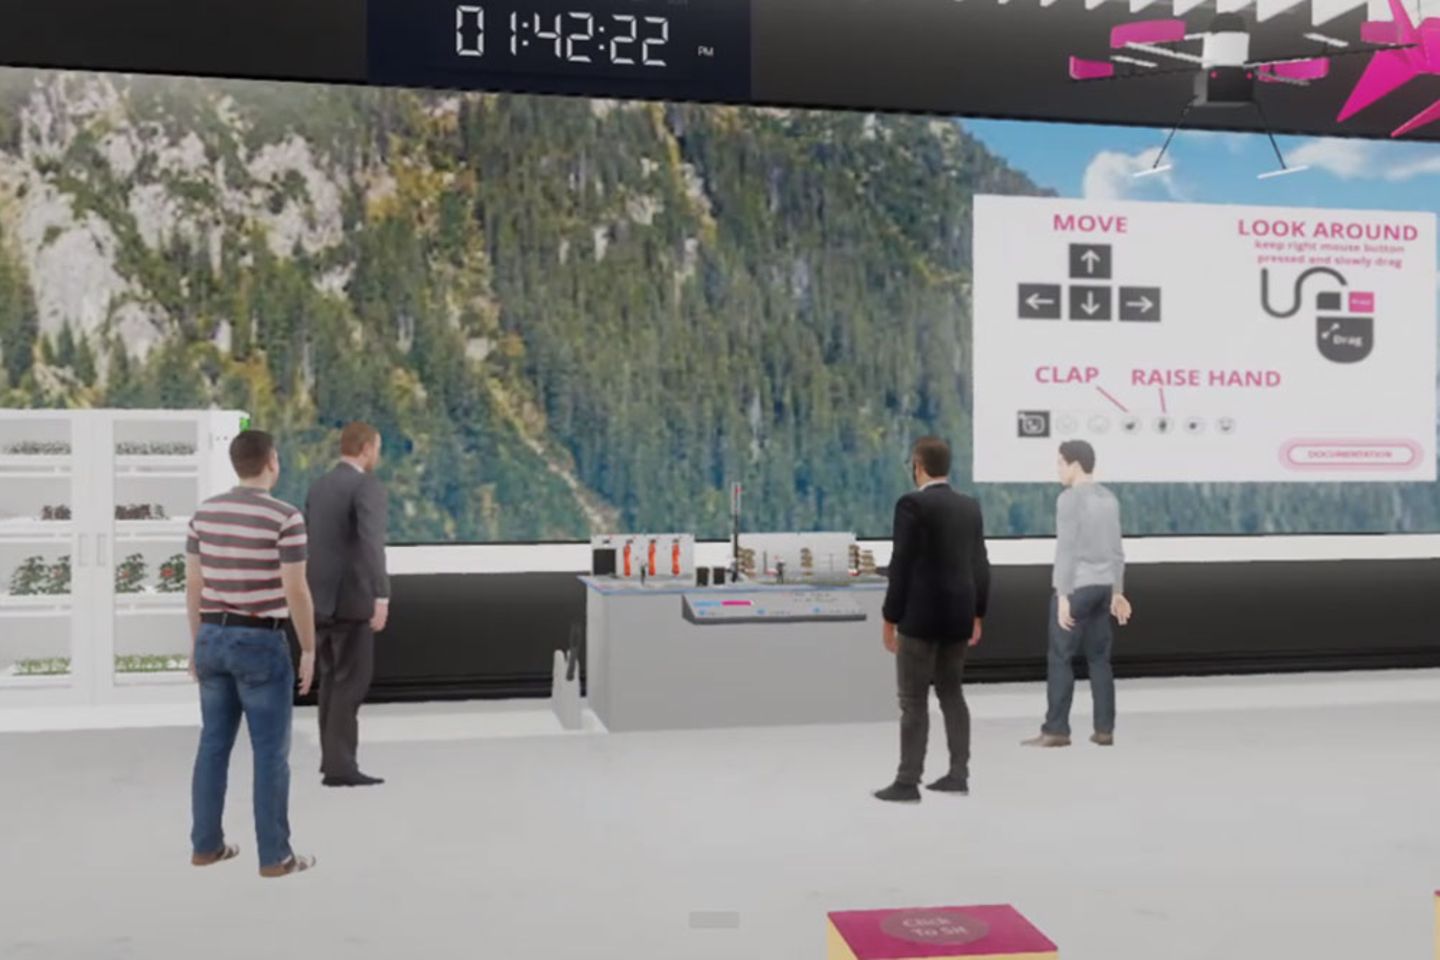 Virtual representation of the Innovation Center with multiple avatars